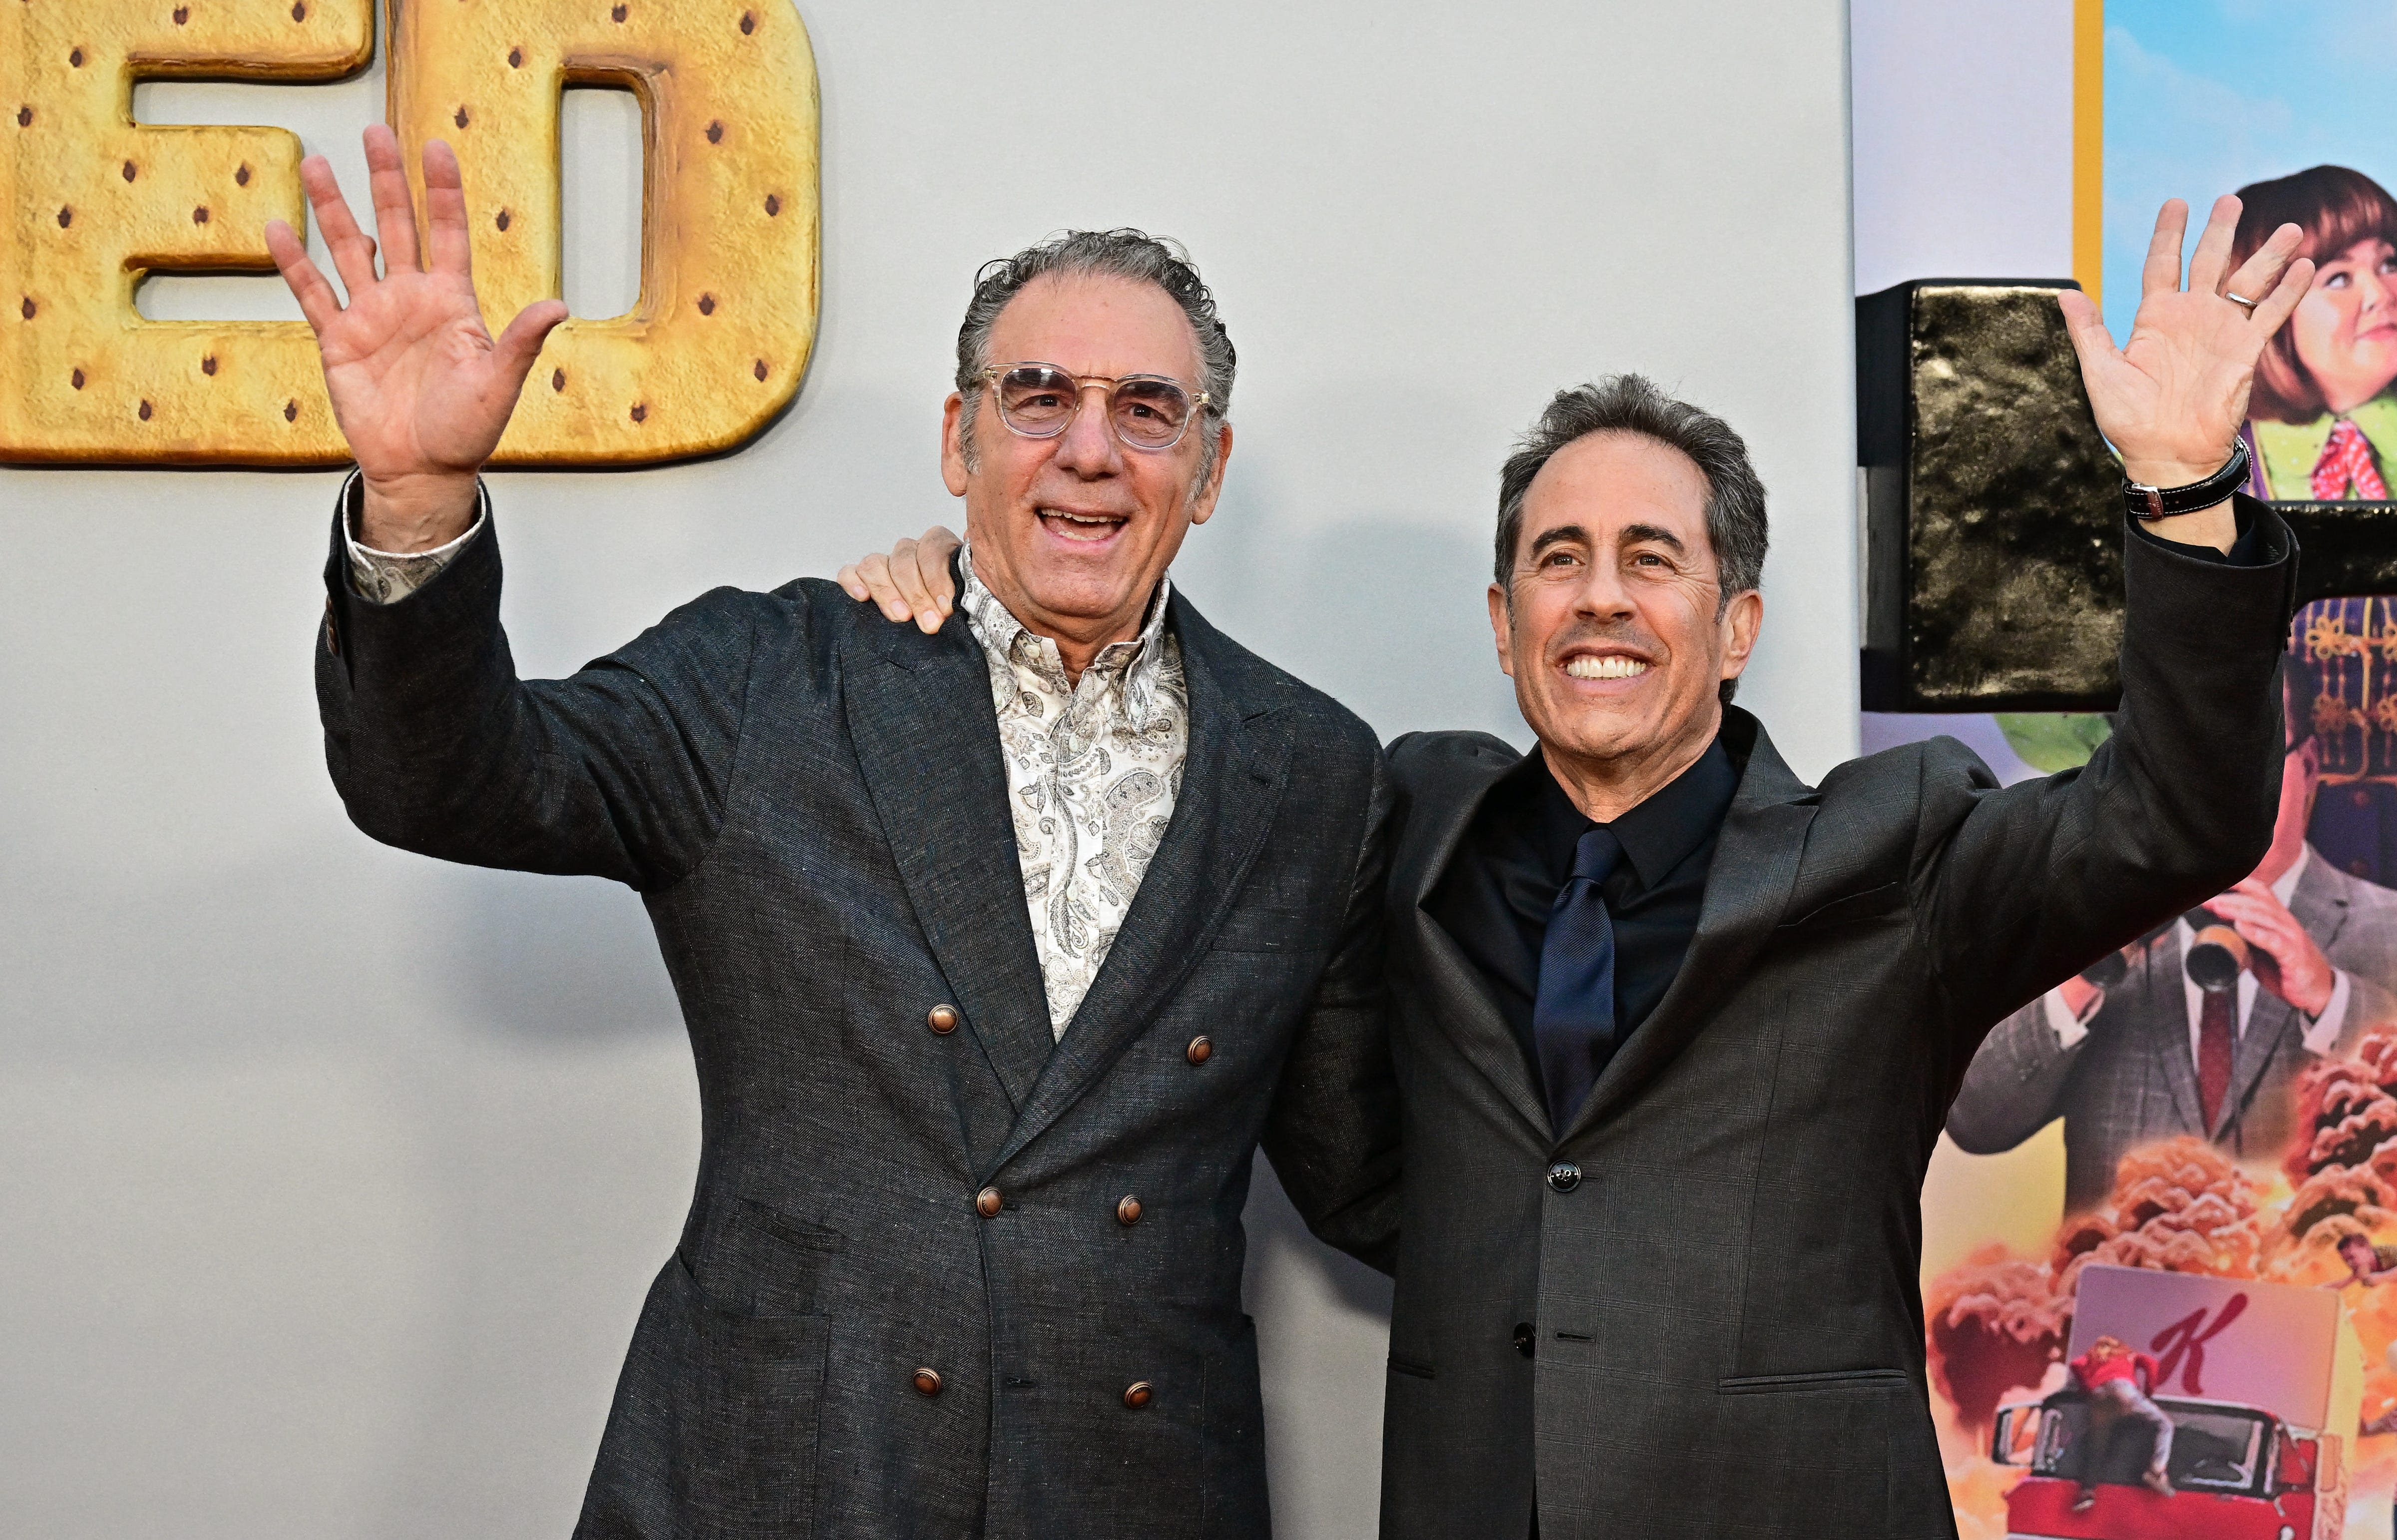 'Seinfeld' star Michael Richards reflects on aftermath of racism scandal: 'It hasn't been easy'